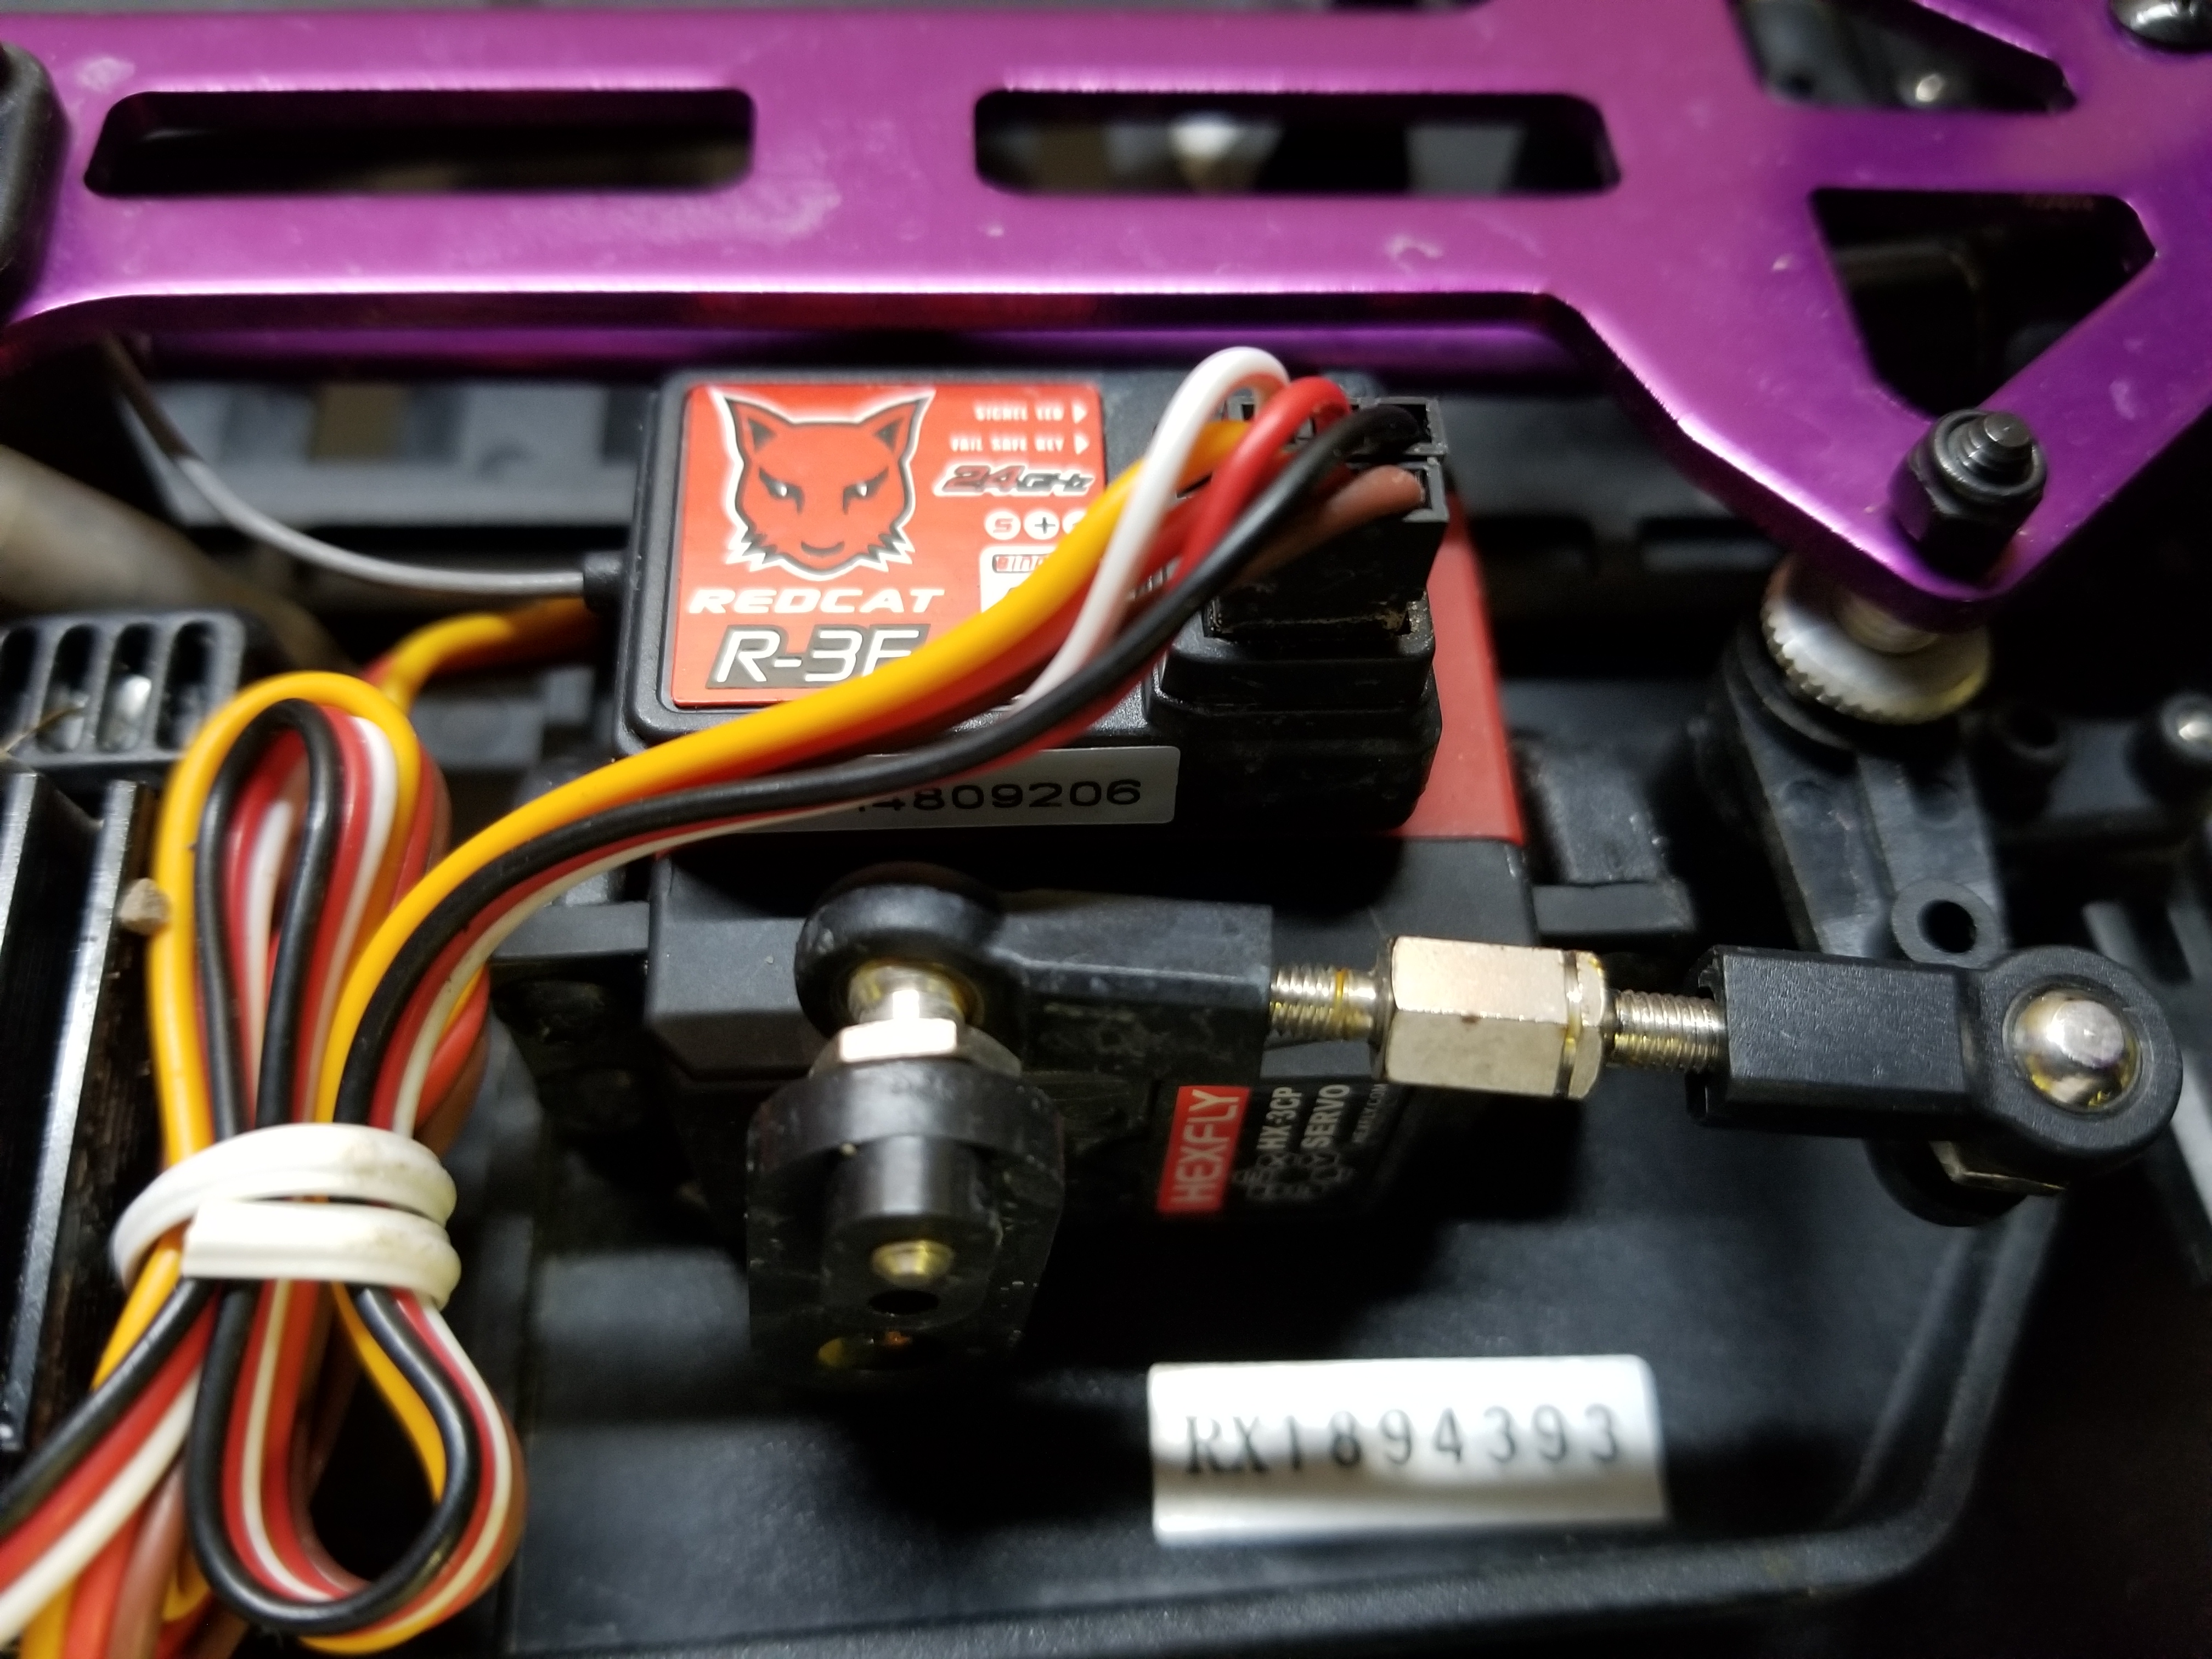 Volcano EPX steering servo and receiver